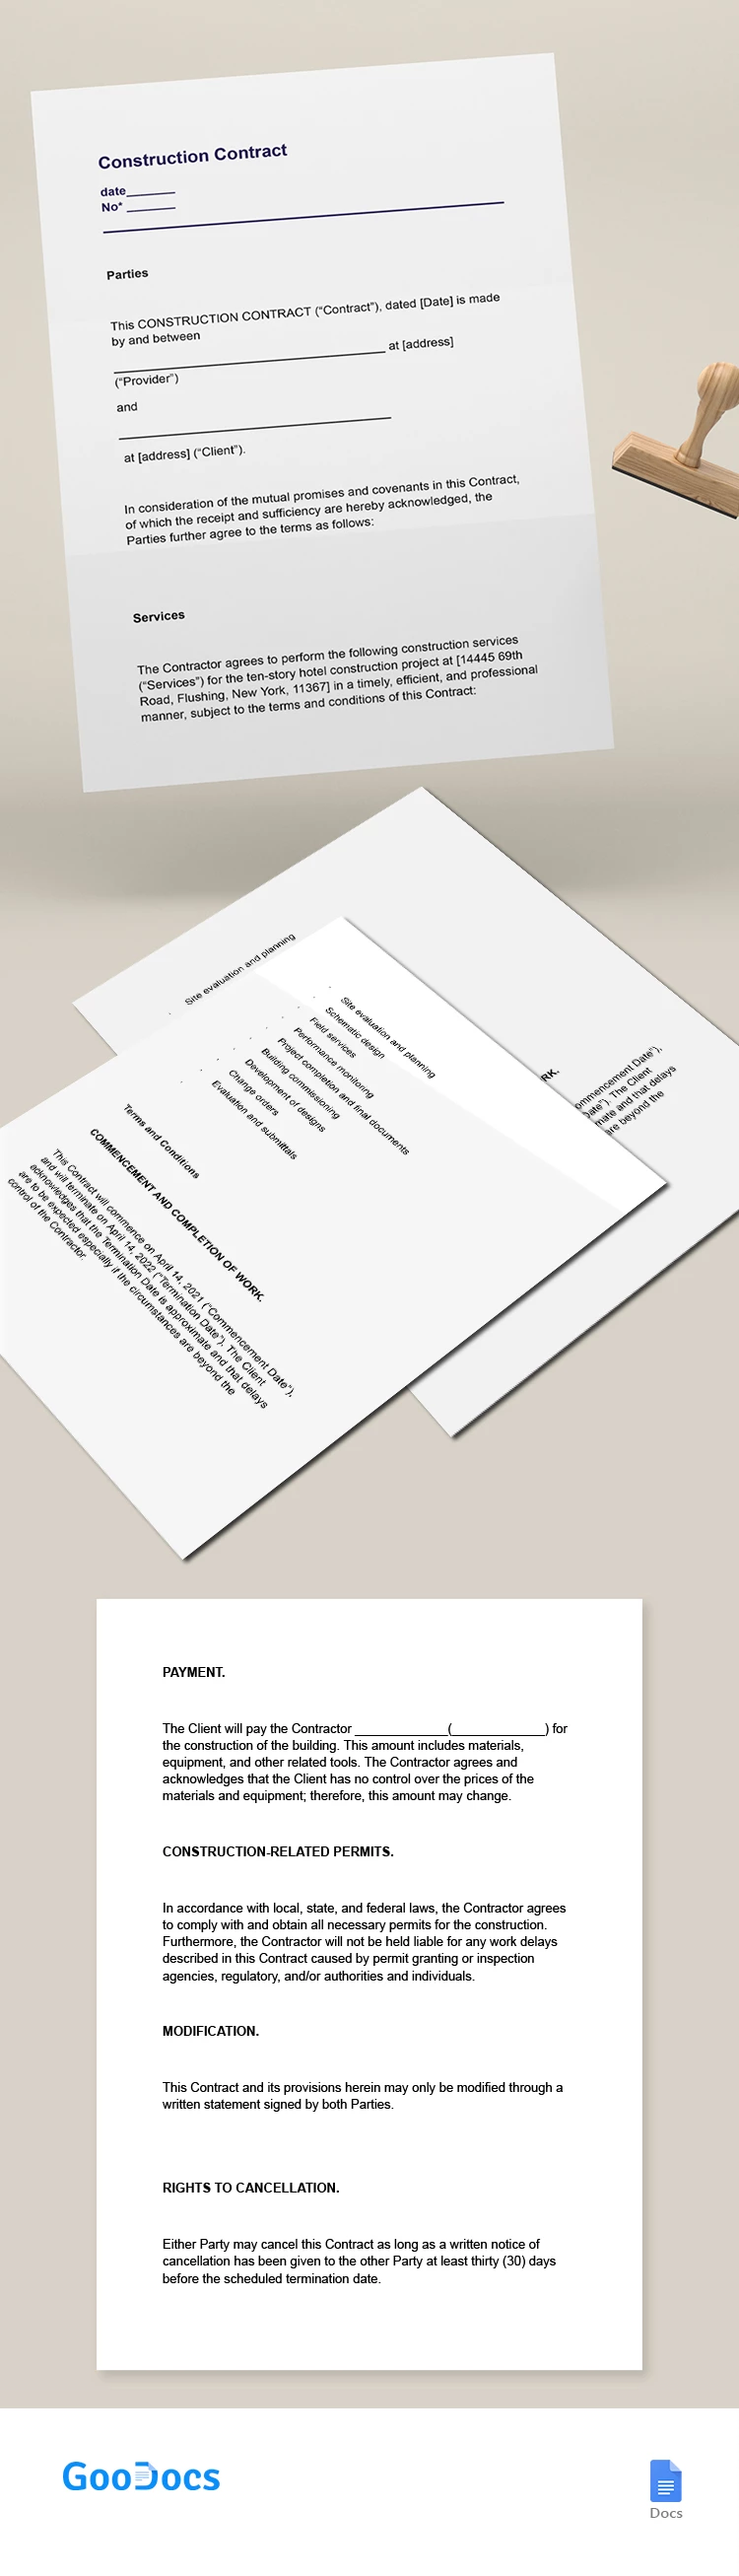 Construction Contract - free Google Docs Template - 10065546